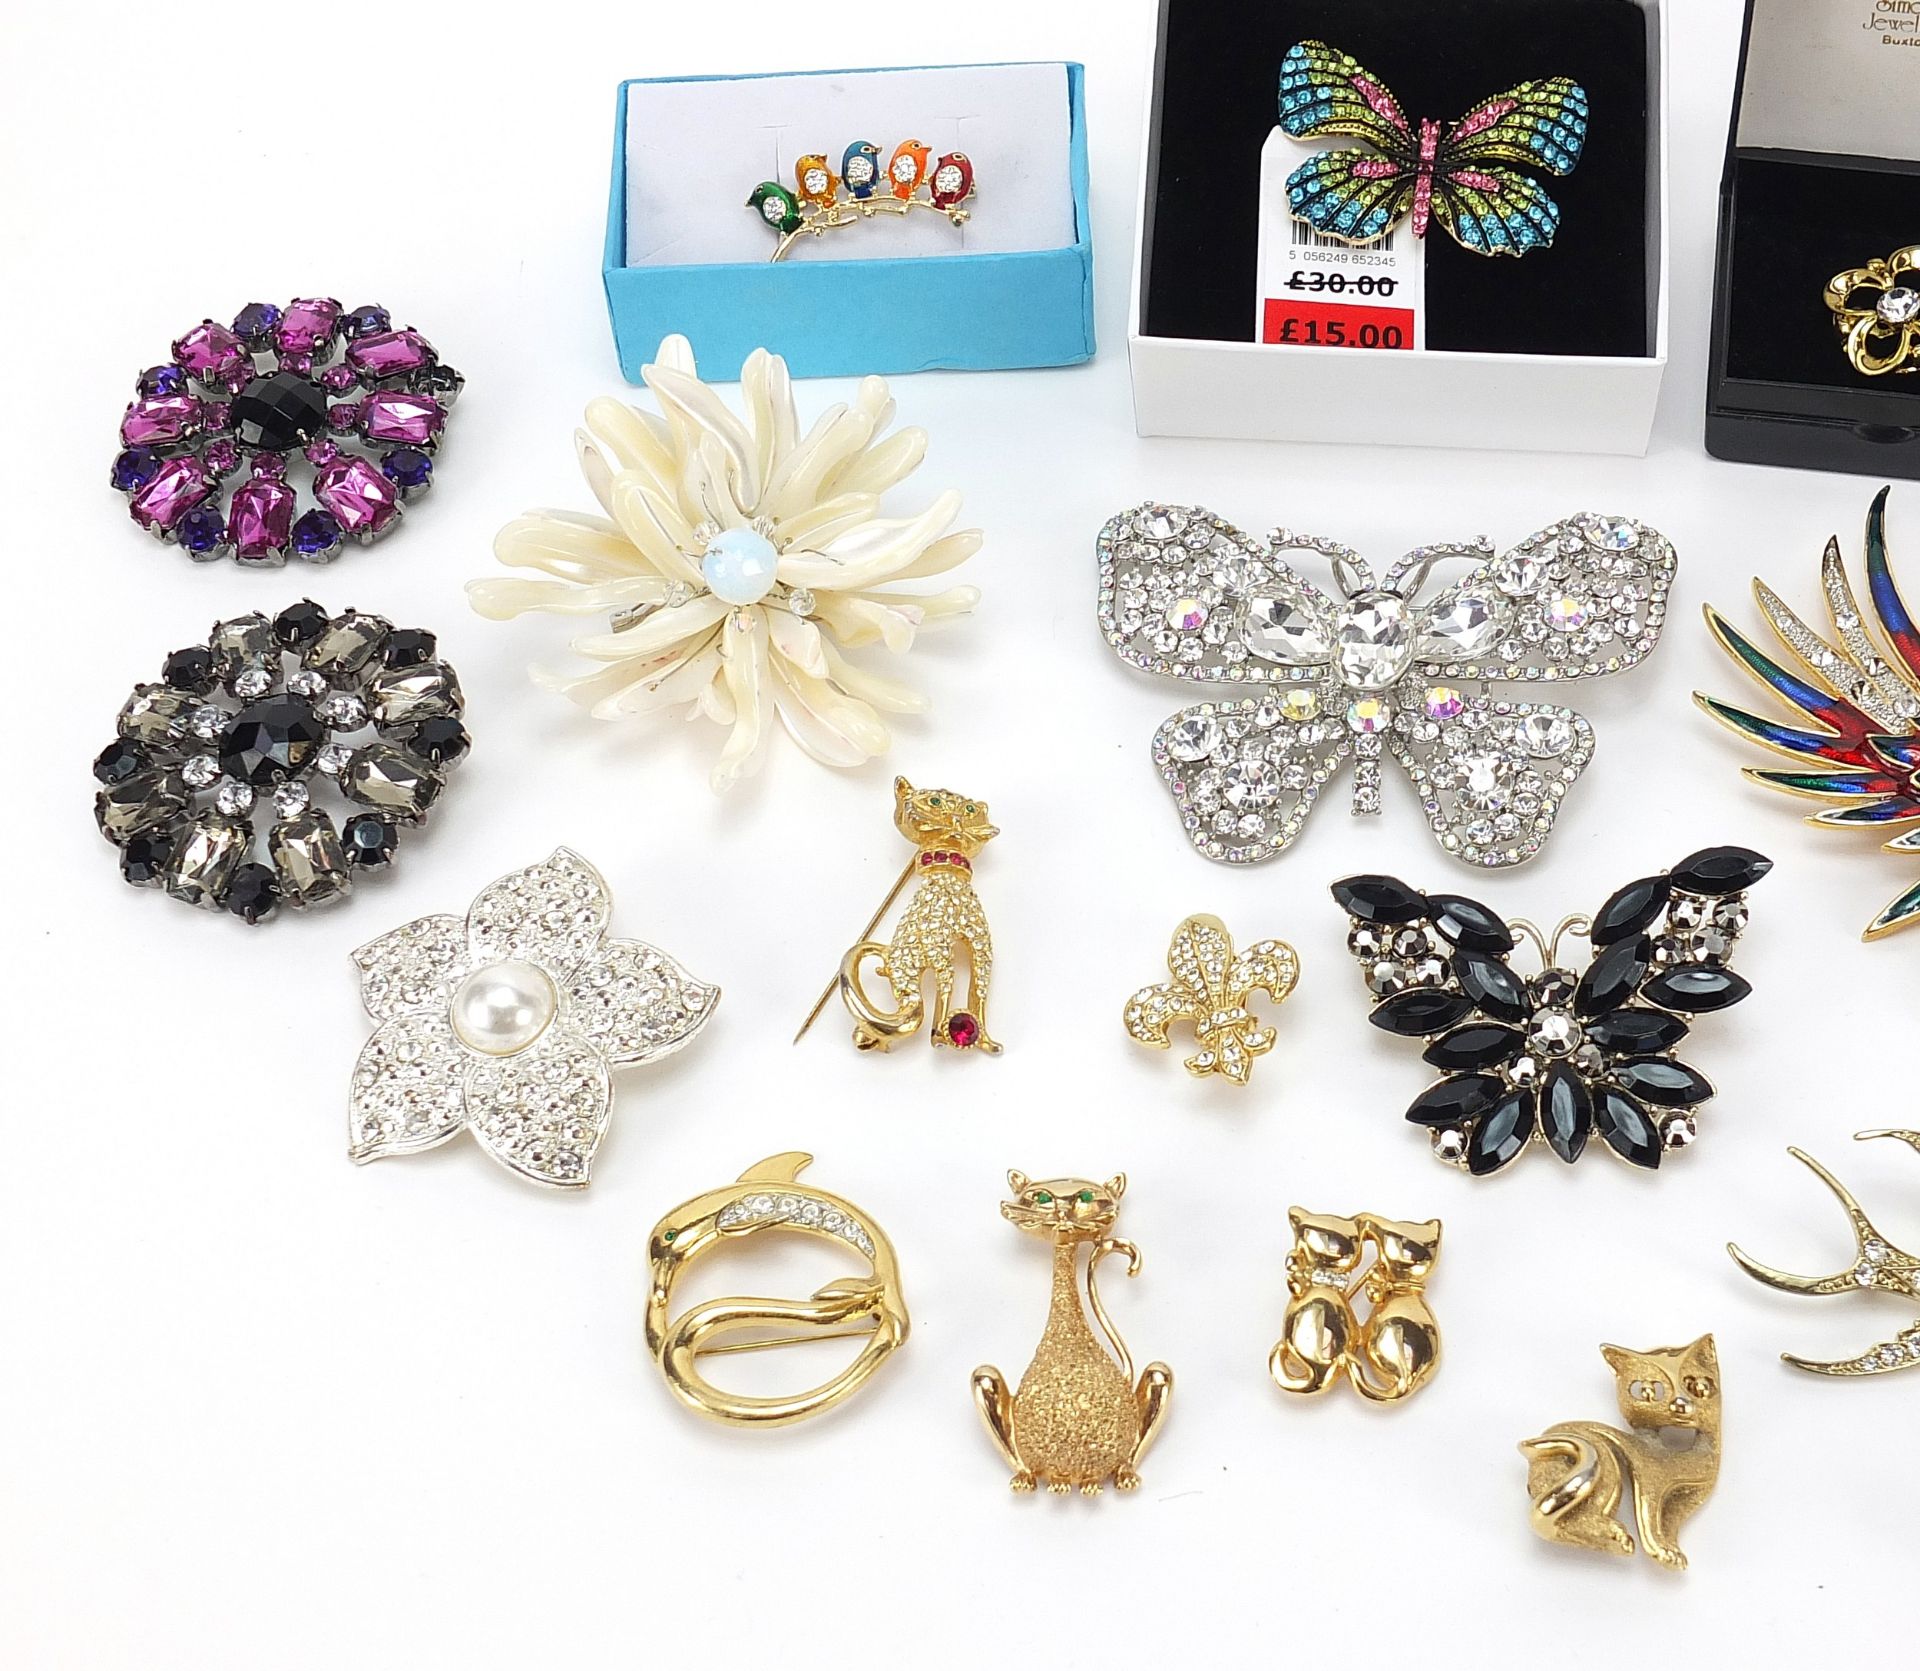 Collection of costume jewellery brooches, including some jeweled and enamel animals - Image 3 of 5